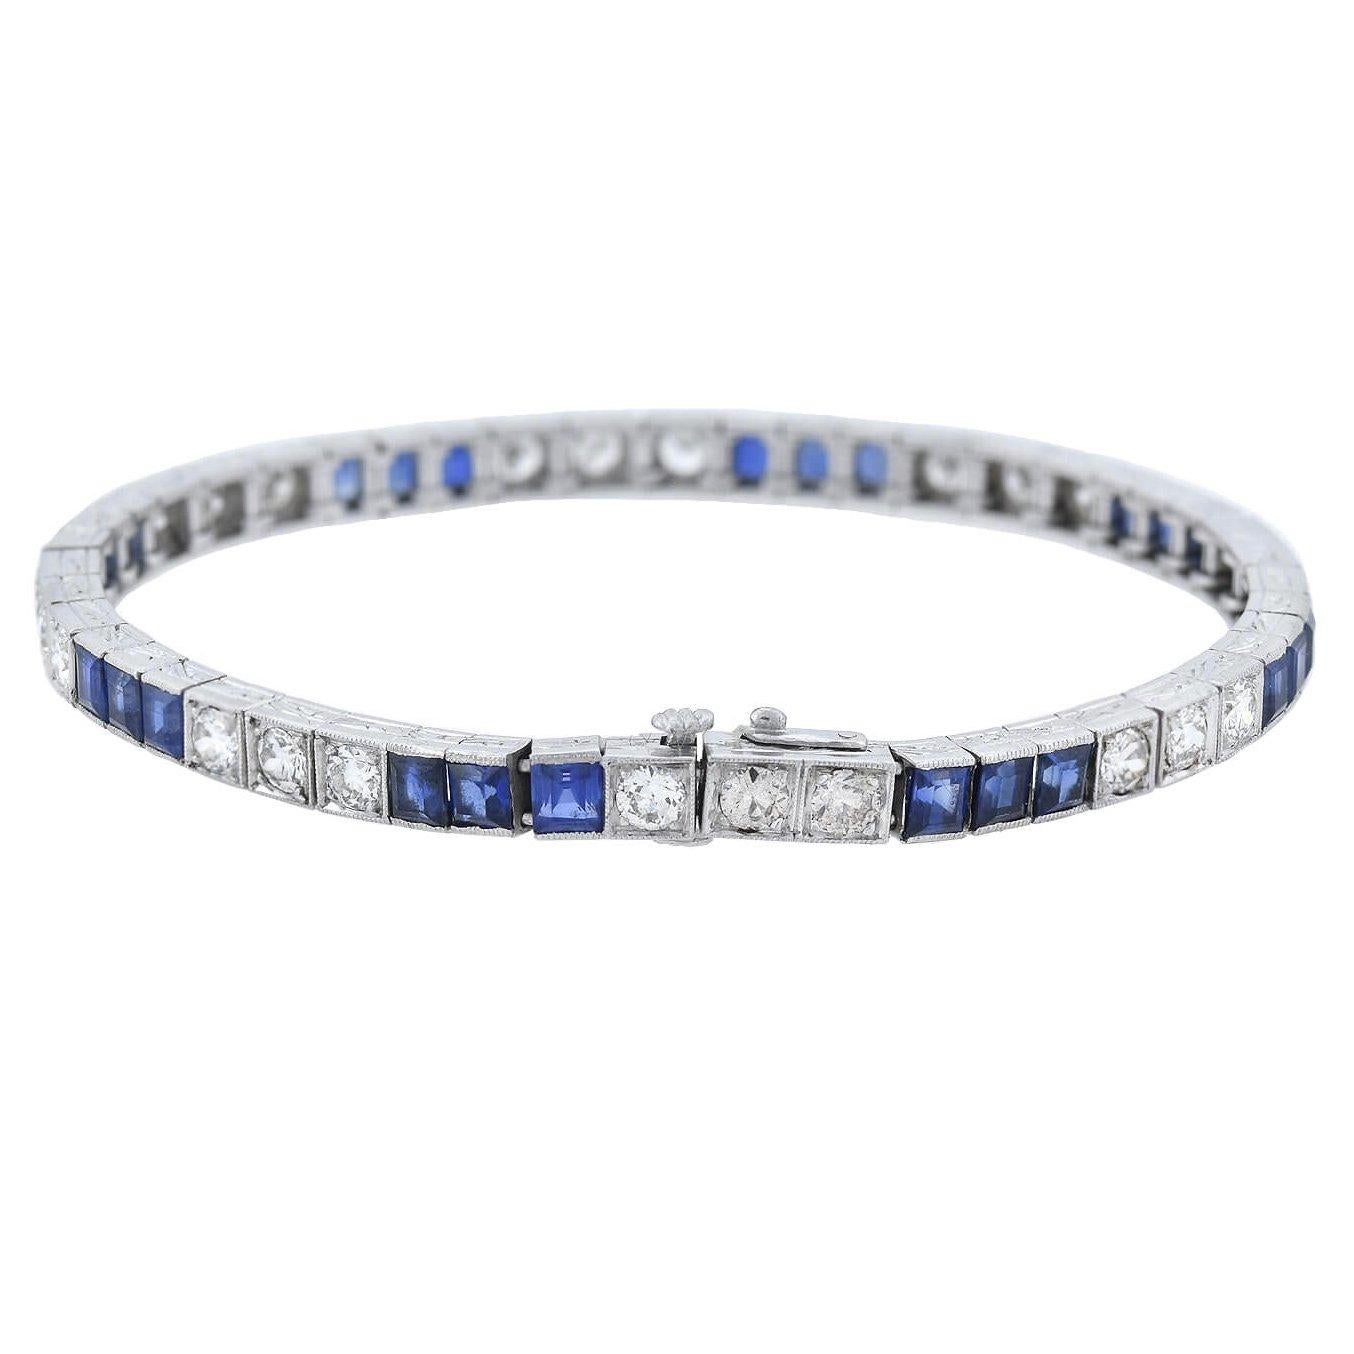 A gorgeous gemstone line bracelet from the Art Deco (ca1920s) era! Crafted in platinum, this fabulous piece features an alternating pattern comprised of sections of sapphires and diamonds. Each sparkling old European Cut diamond is micro-prong set